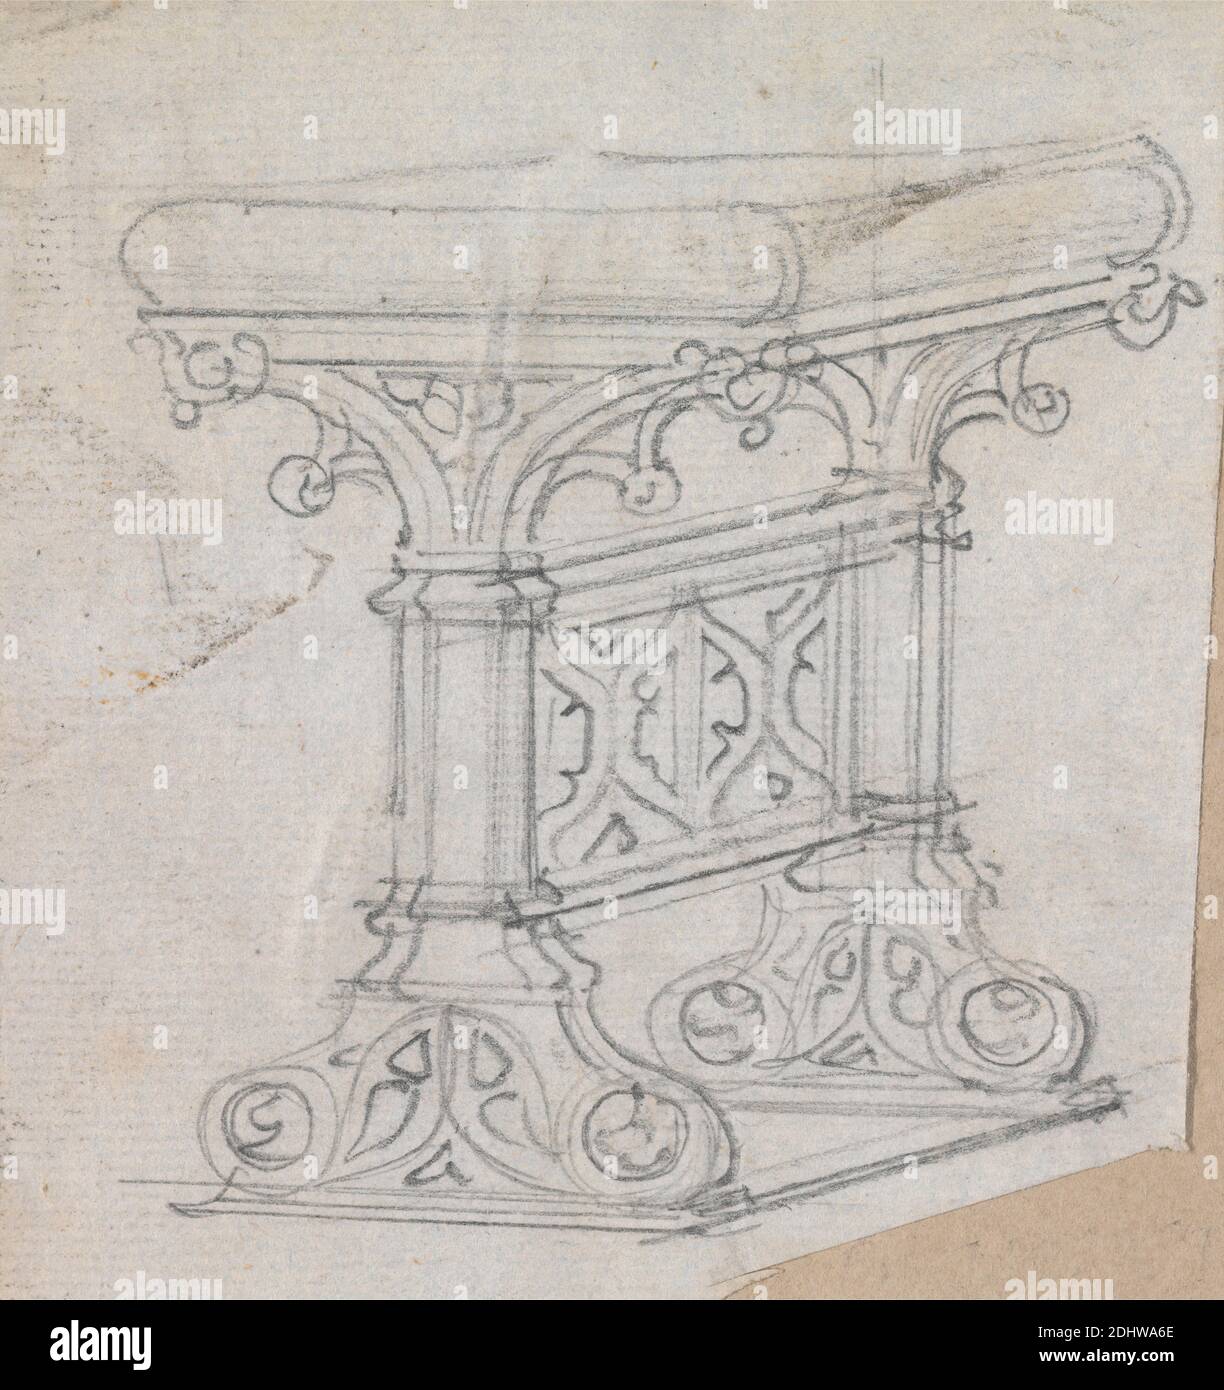 Design for a Gothic Table, Augustus Welby Northmore Pugin, 1812–1852, British, Augustus Charles Pugin, 1762–1832, French, undated, Graphite on medium, moderately textured, cream laid paper, Mount: 12 3/8 x 13 1/4 inches (31.4 x 33.7 cm) and Sheet: 4 1/4 x 3 3/4 inches (10.8 x 9.5 cm), architectural subject, designs, Gothic (Medieval), table Stock Photo